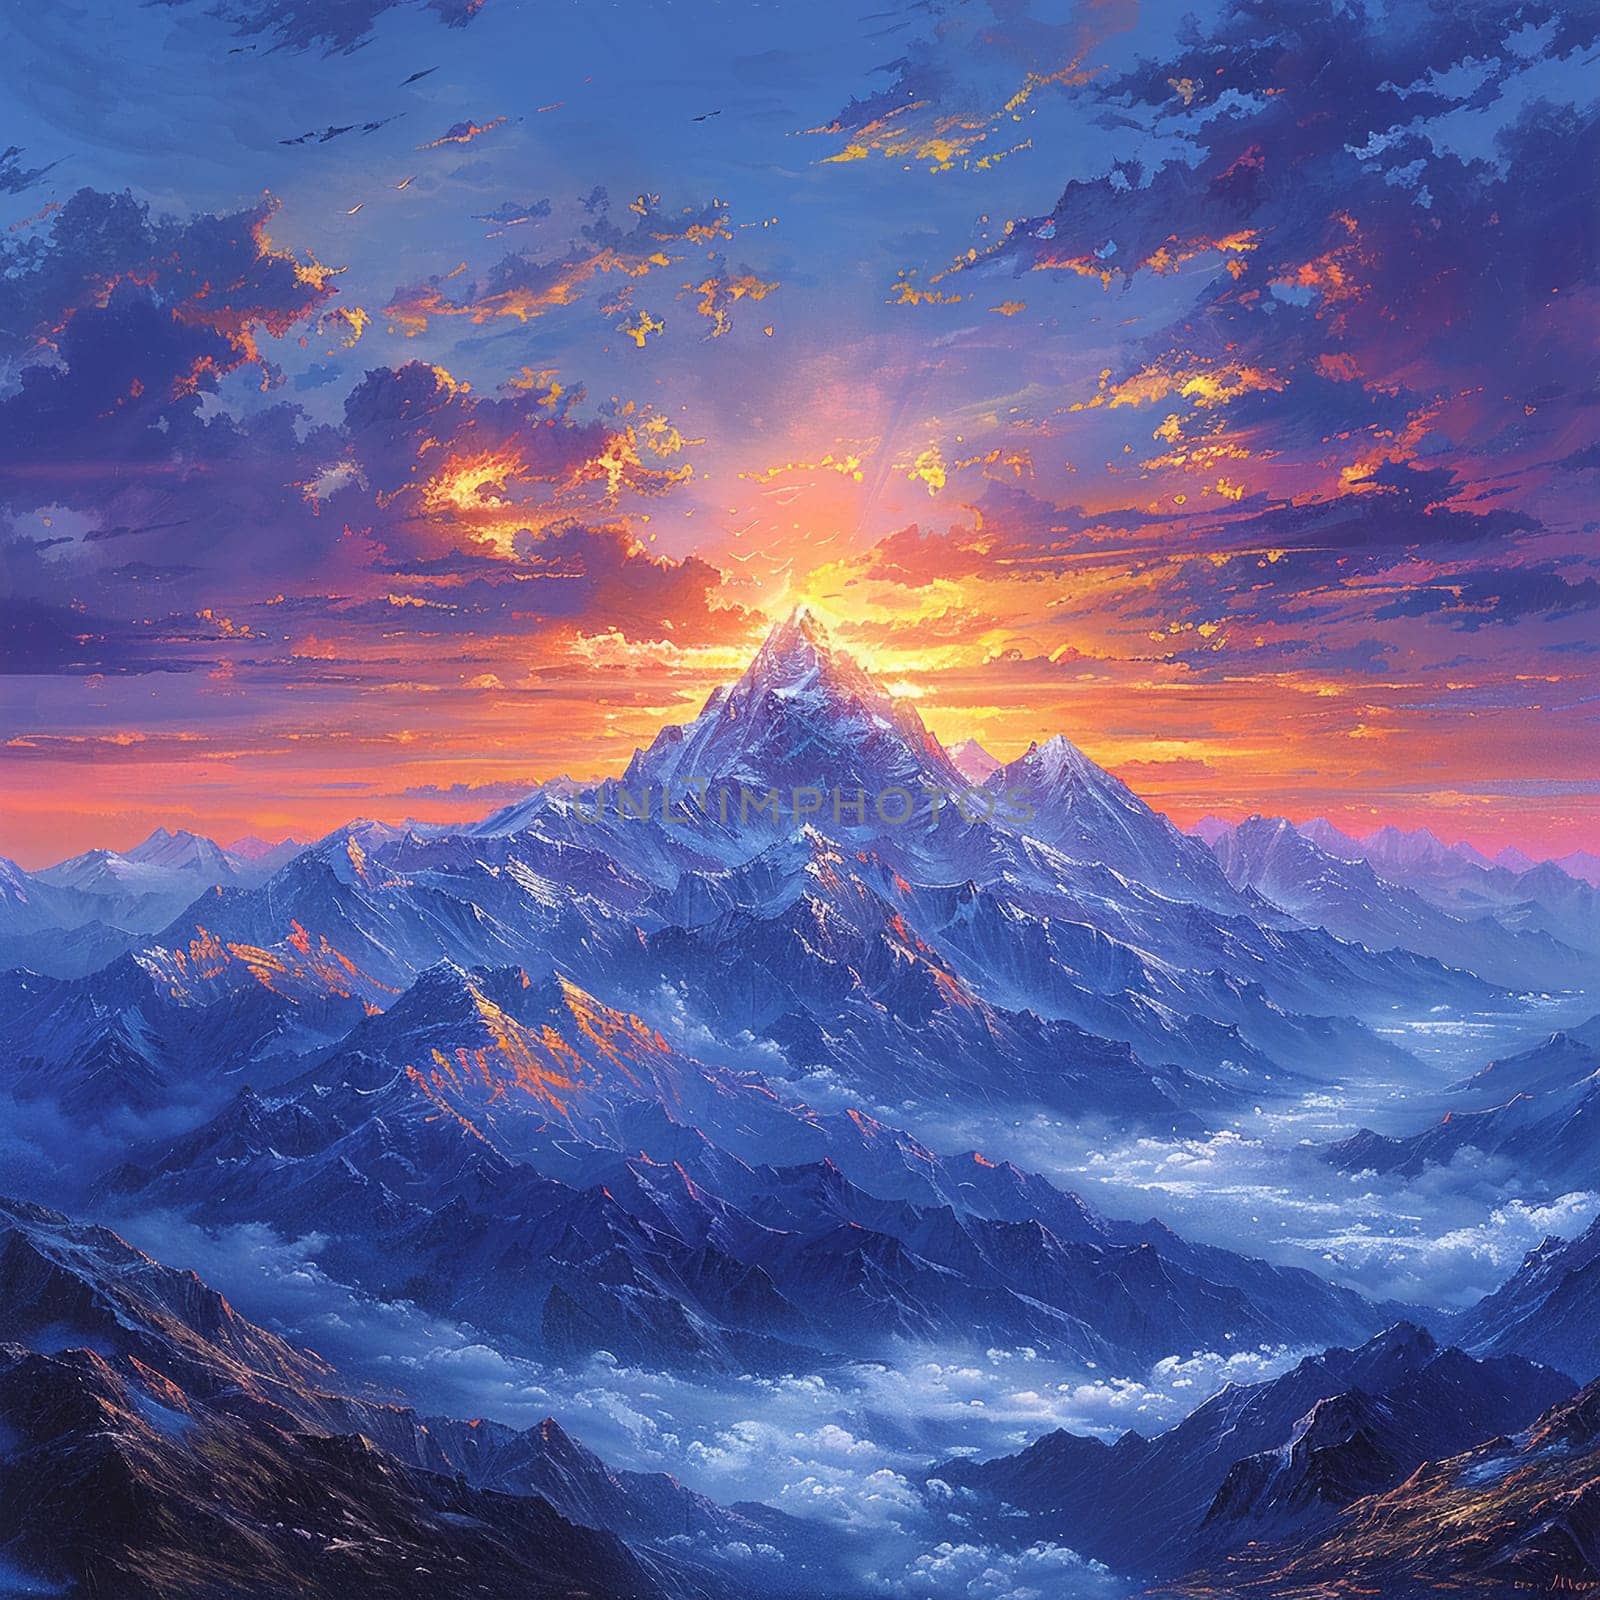 Mountain peak sunset painted with an emphasis on dramatic lighting and expansive views in a romantic style